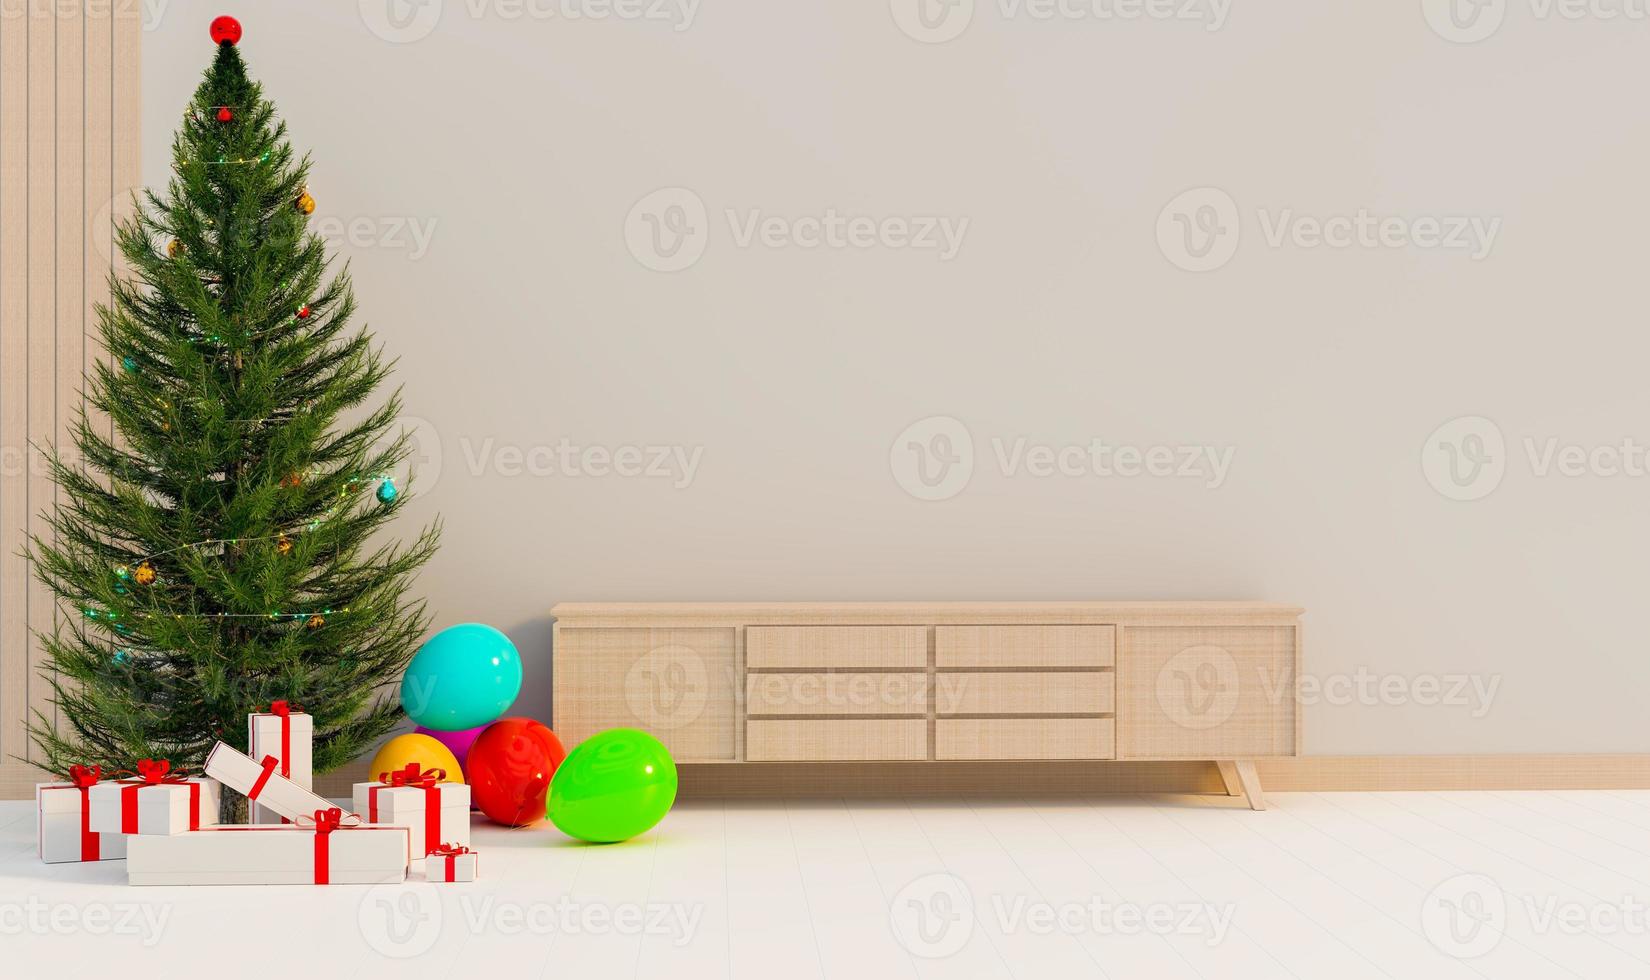 merry christmas and happy new year festival, christmas tree and cristmas presents decoration in home, photo